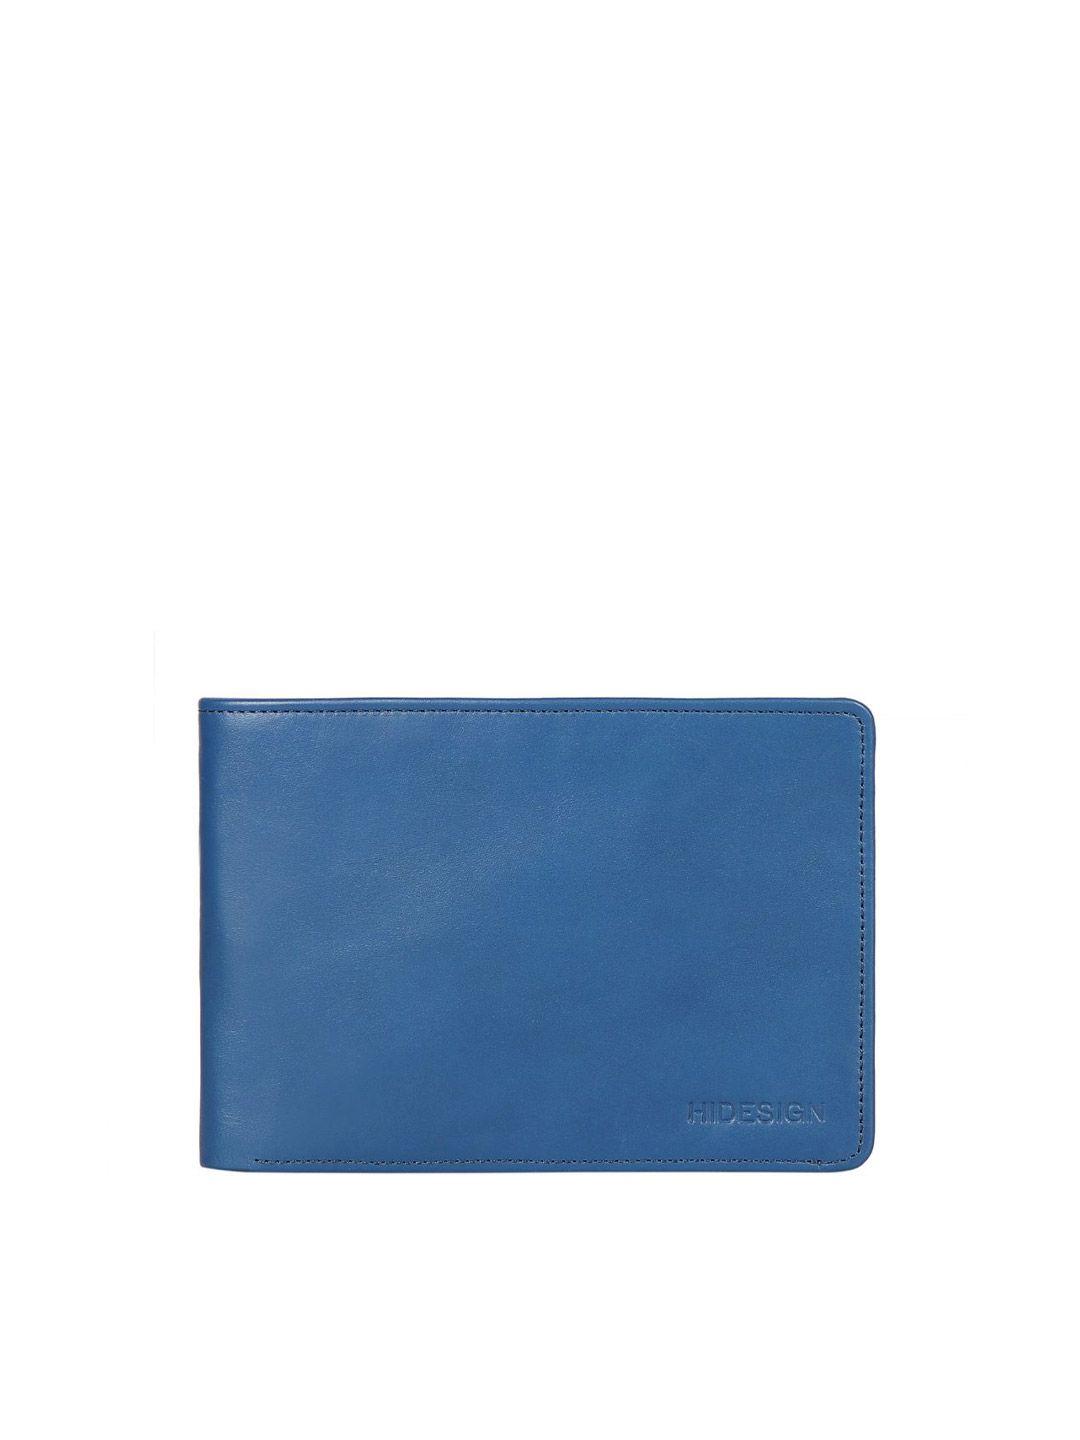 Hidesign Women Blue Leather Two Fold Wallet Price in India